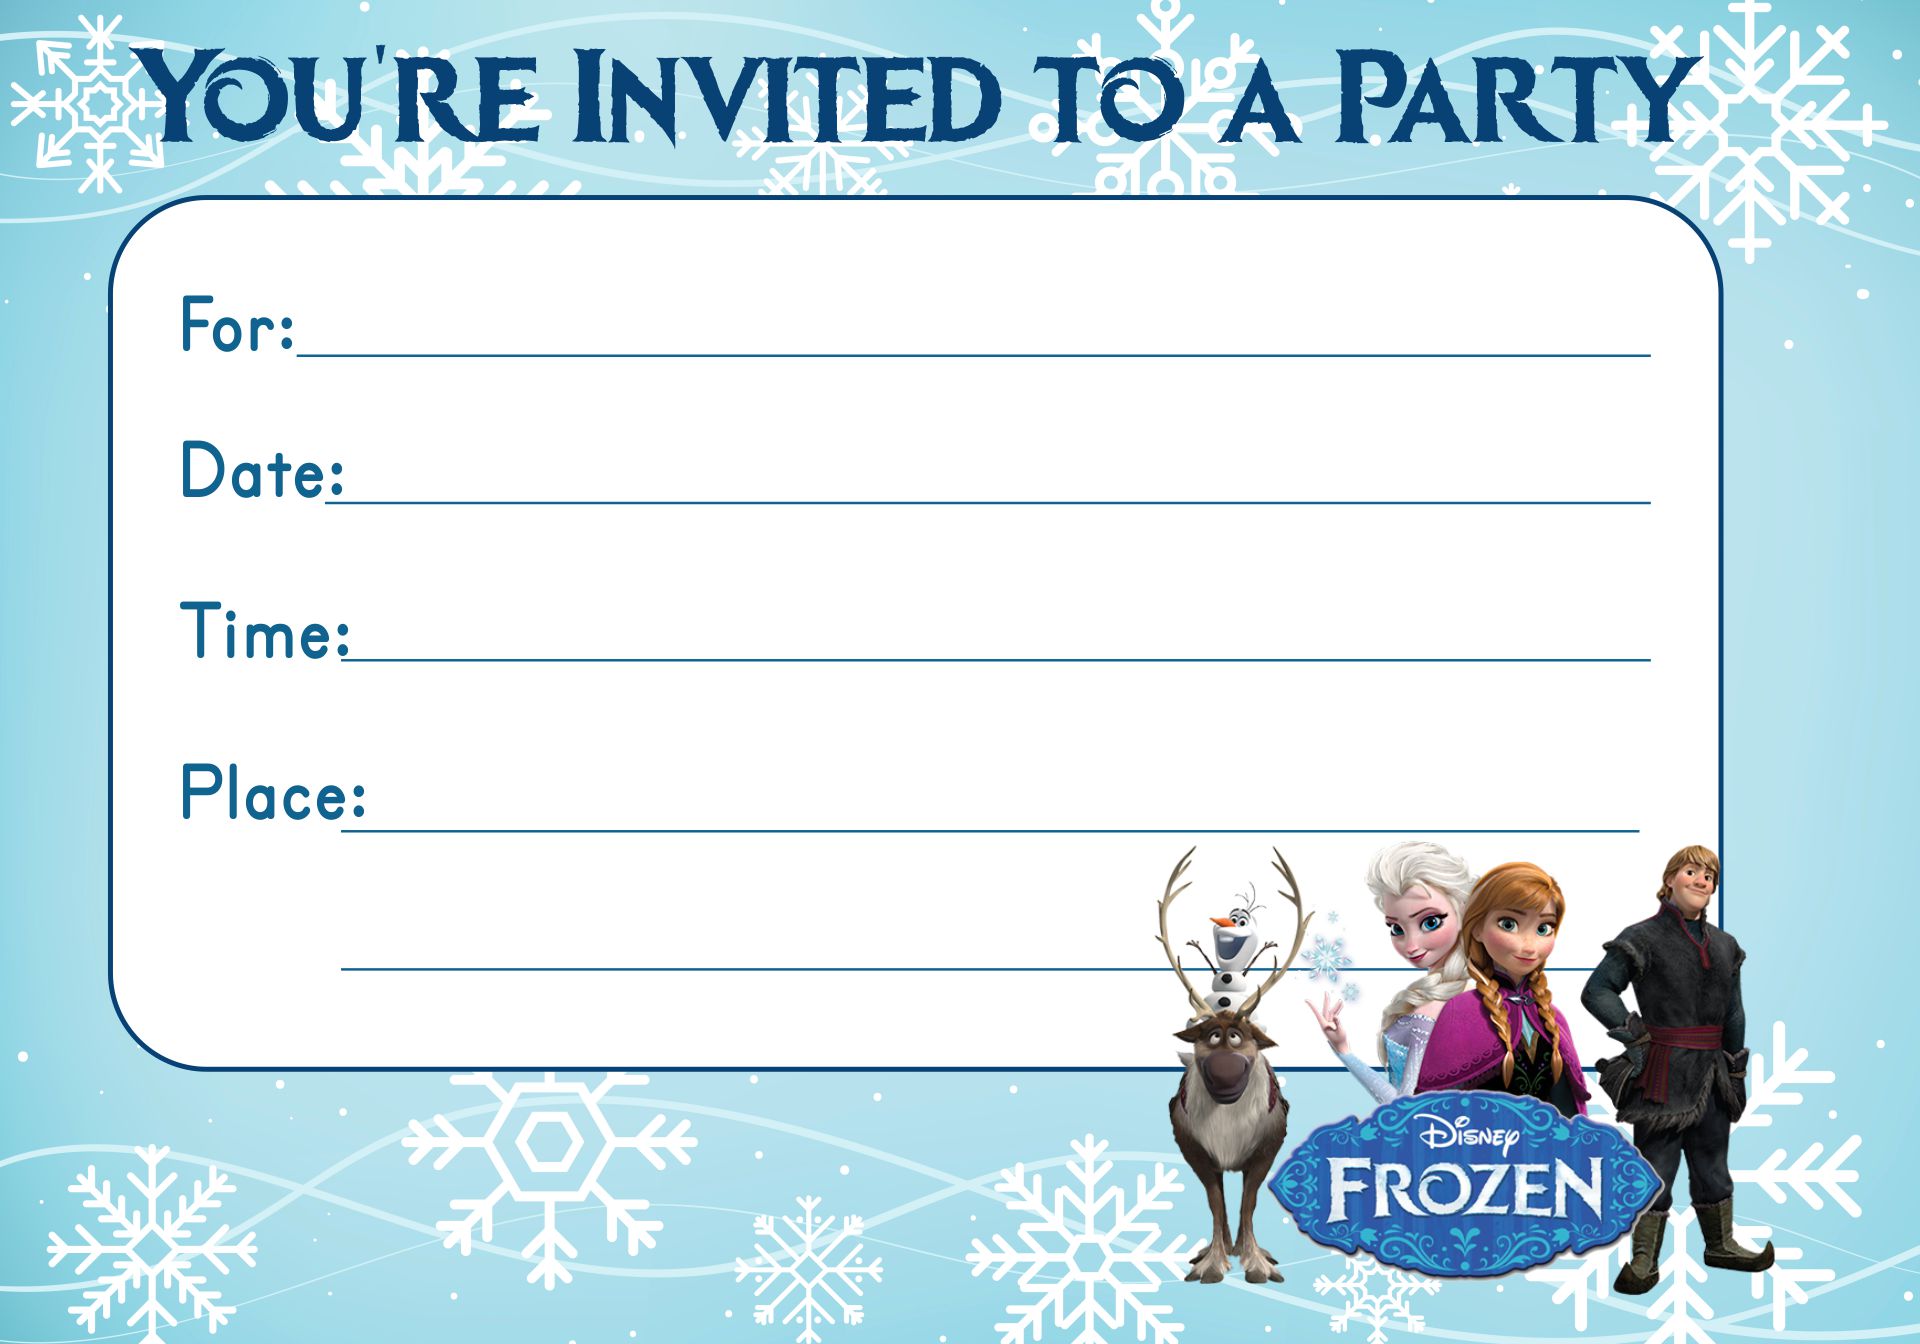 9 Best Images of Frozen Birthday Invitations Editable Printable